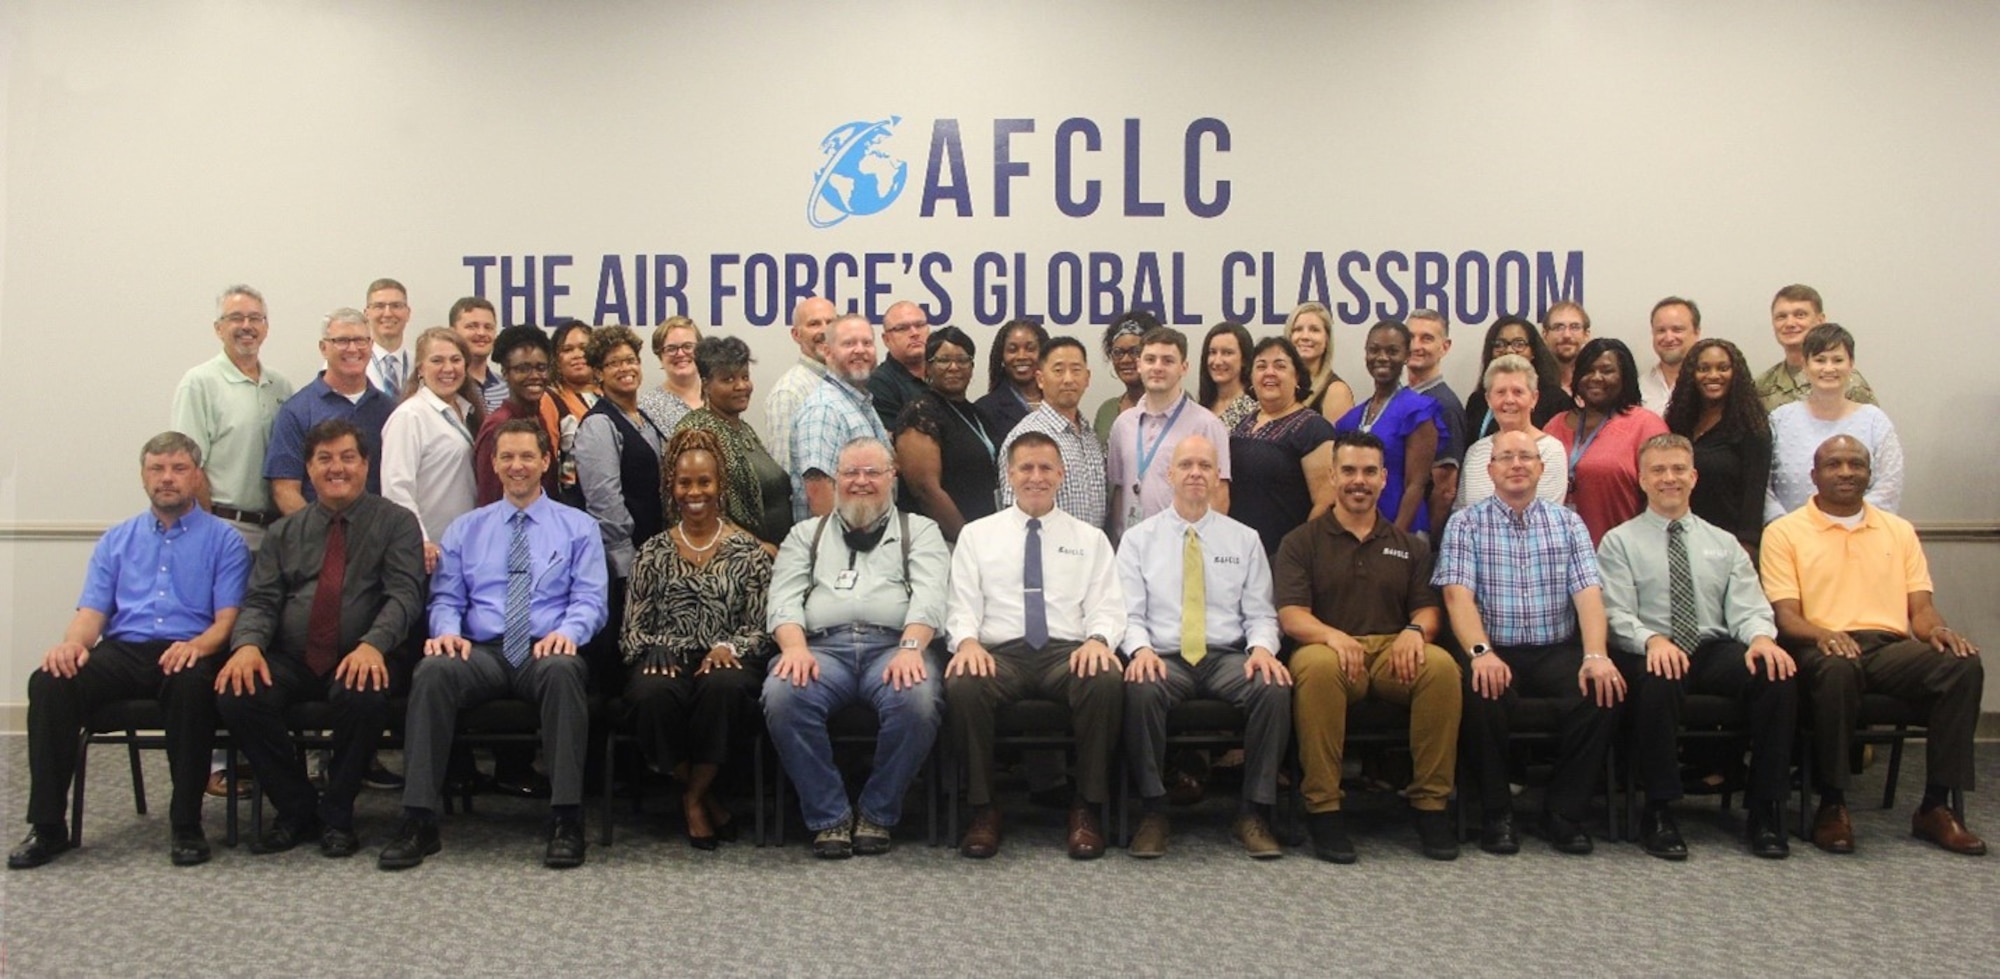 AFCLC staff members in class picture format in front of AFCLC banner